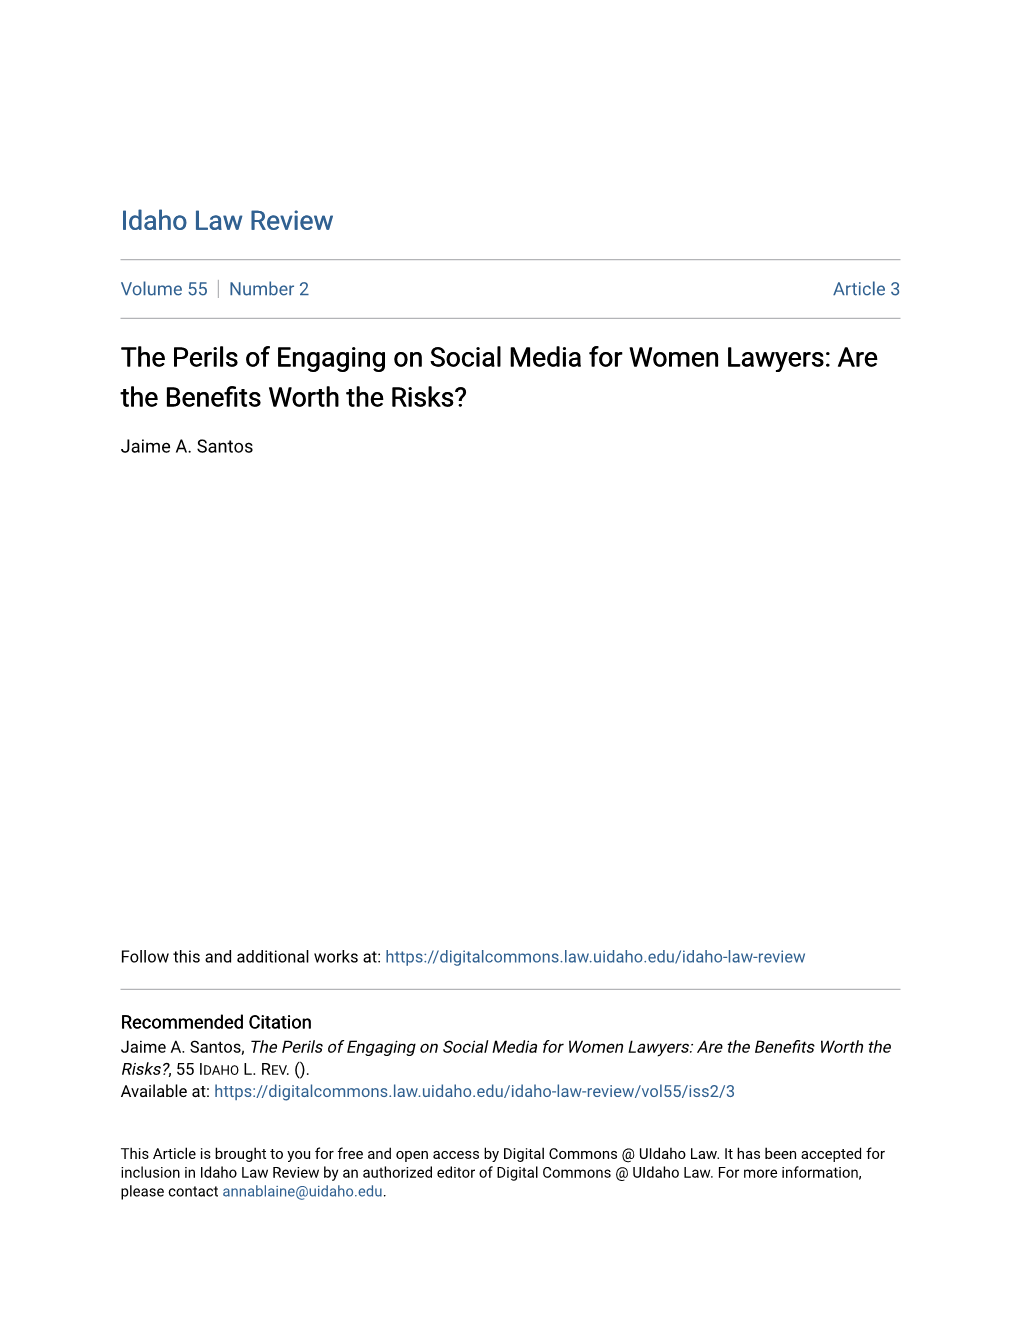 The Perils of Engaging on Social Media for Women Lawyers: Are the Benefits Orw Th the Risks?